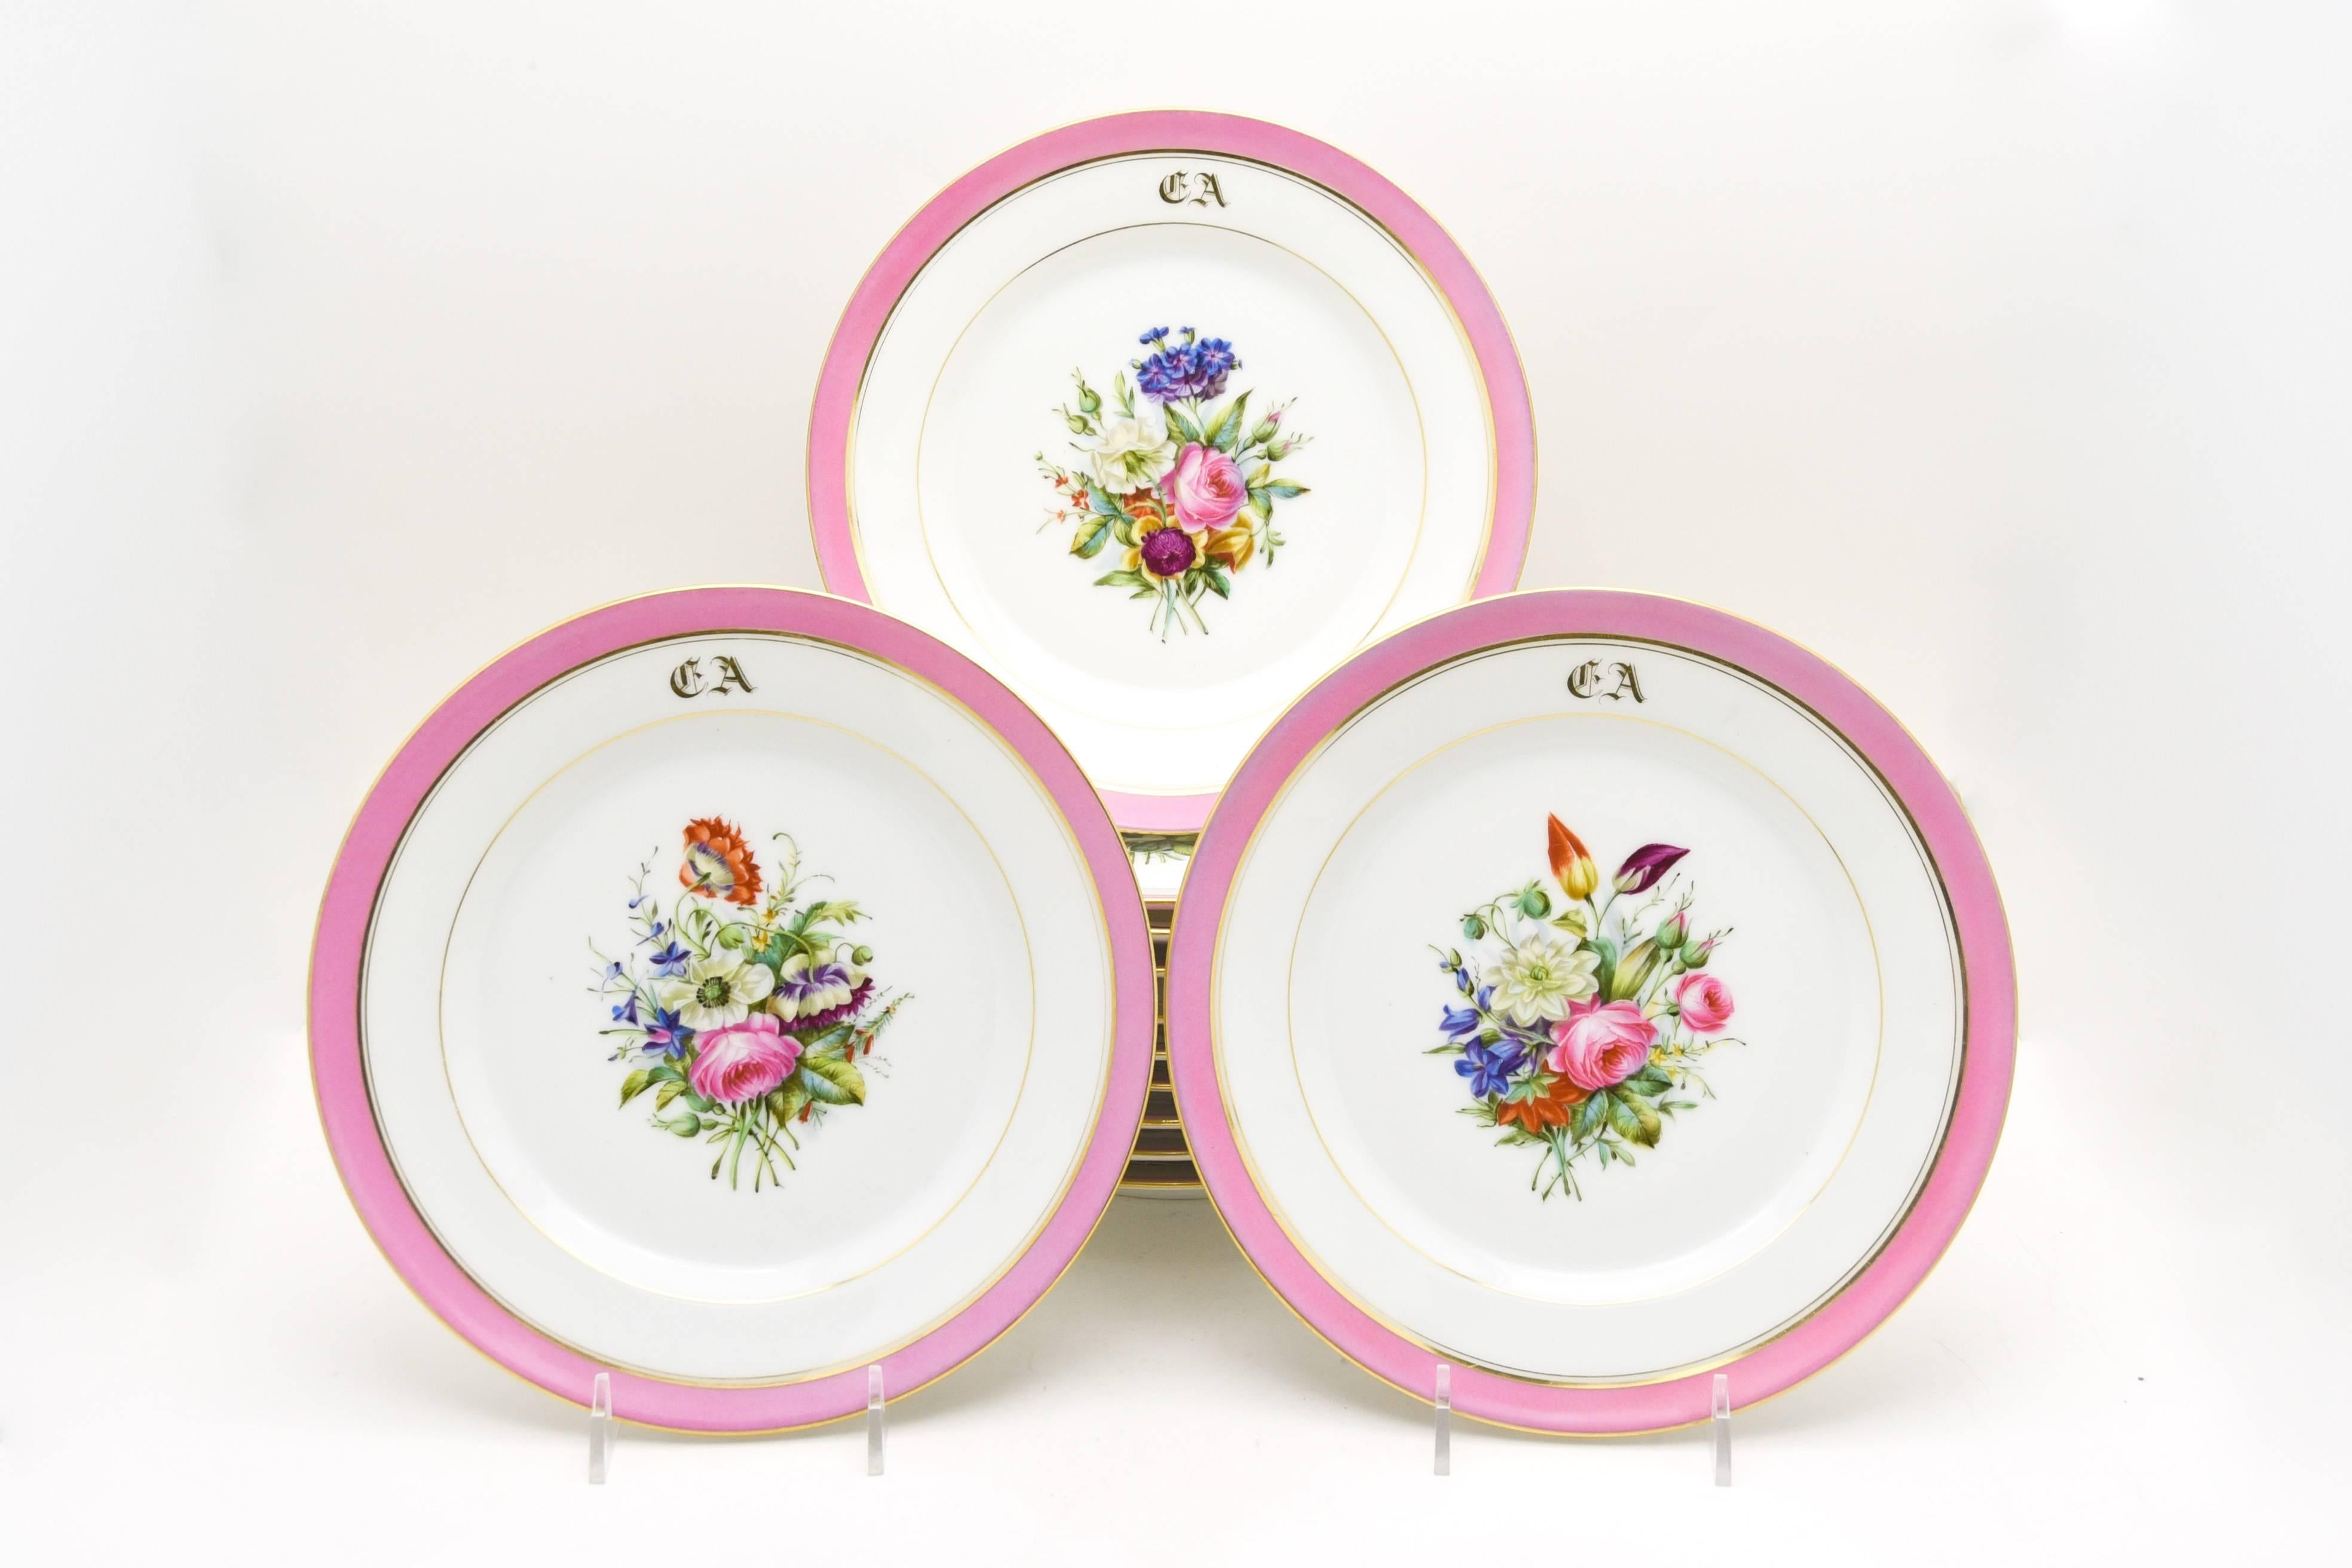 This gorgeous 19th century French dessert set features botanical central decoration, each uniquely hand-painted with a different bouquet of mixed flowers. The composition is detailed and the combination of colors and species creates light and